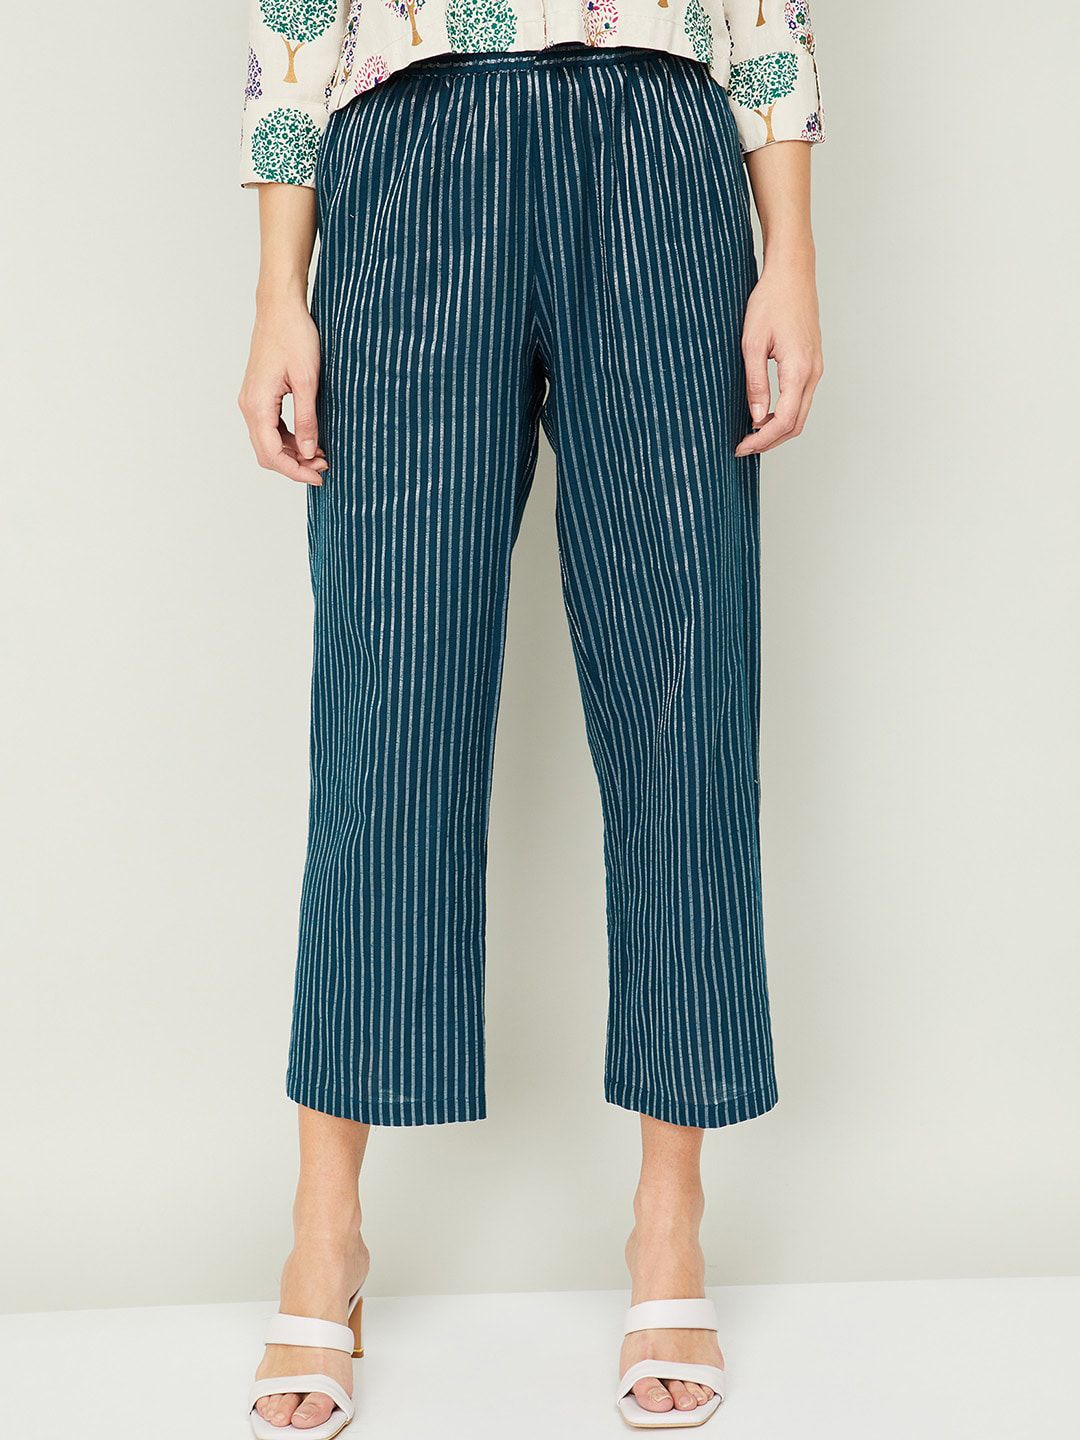 Melange by Lifestyle Women Teal Striped Cotton Trousers Price in India